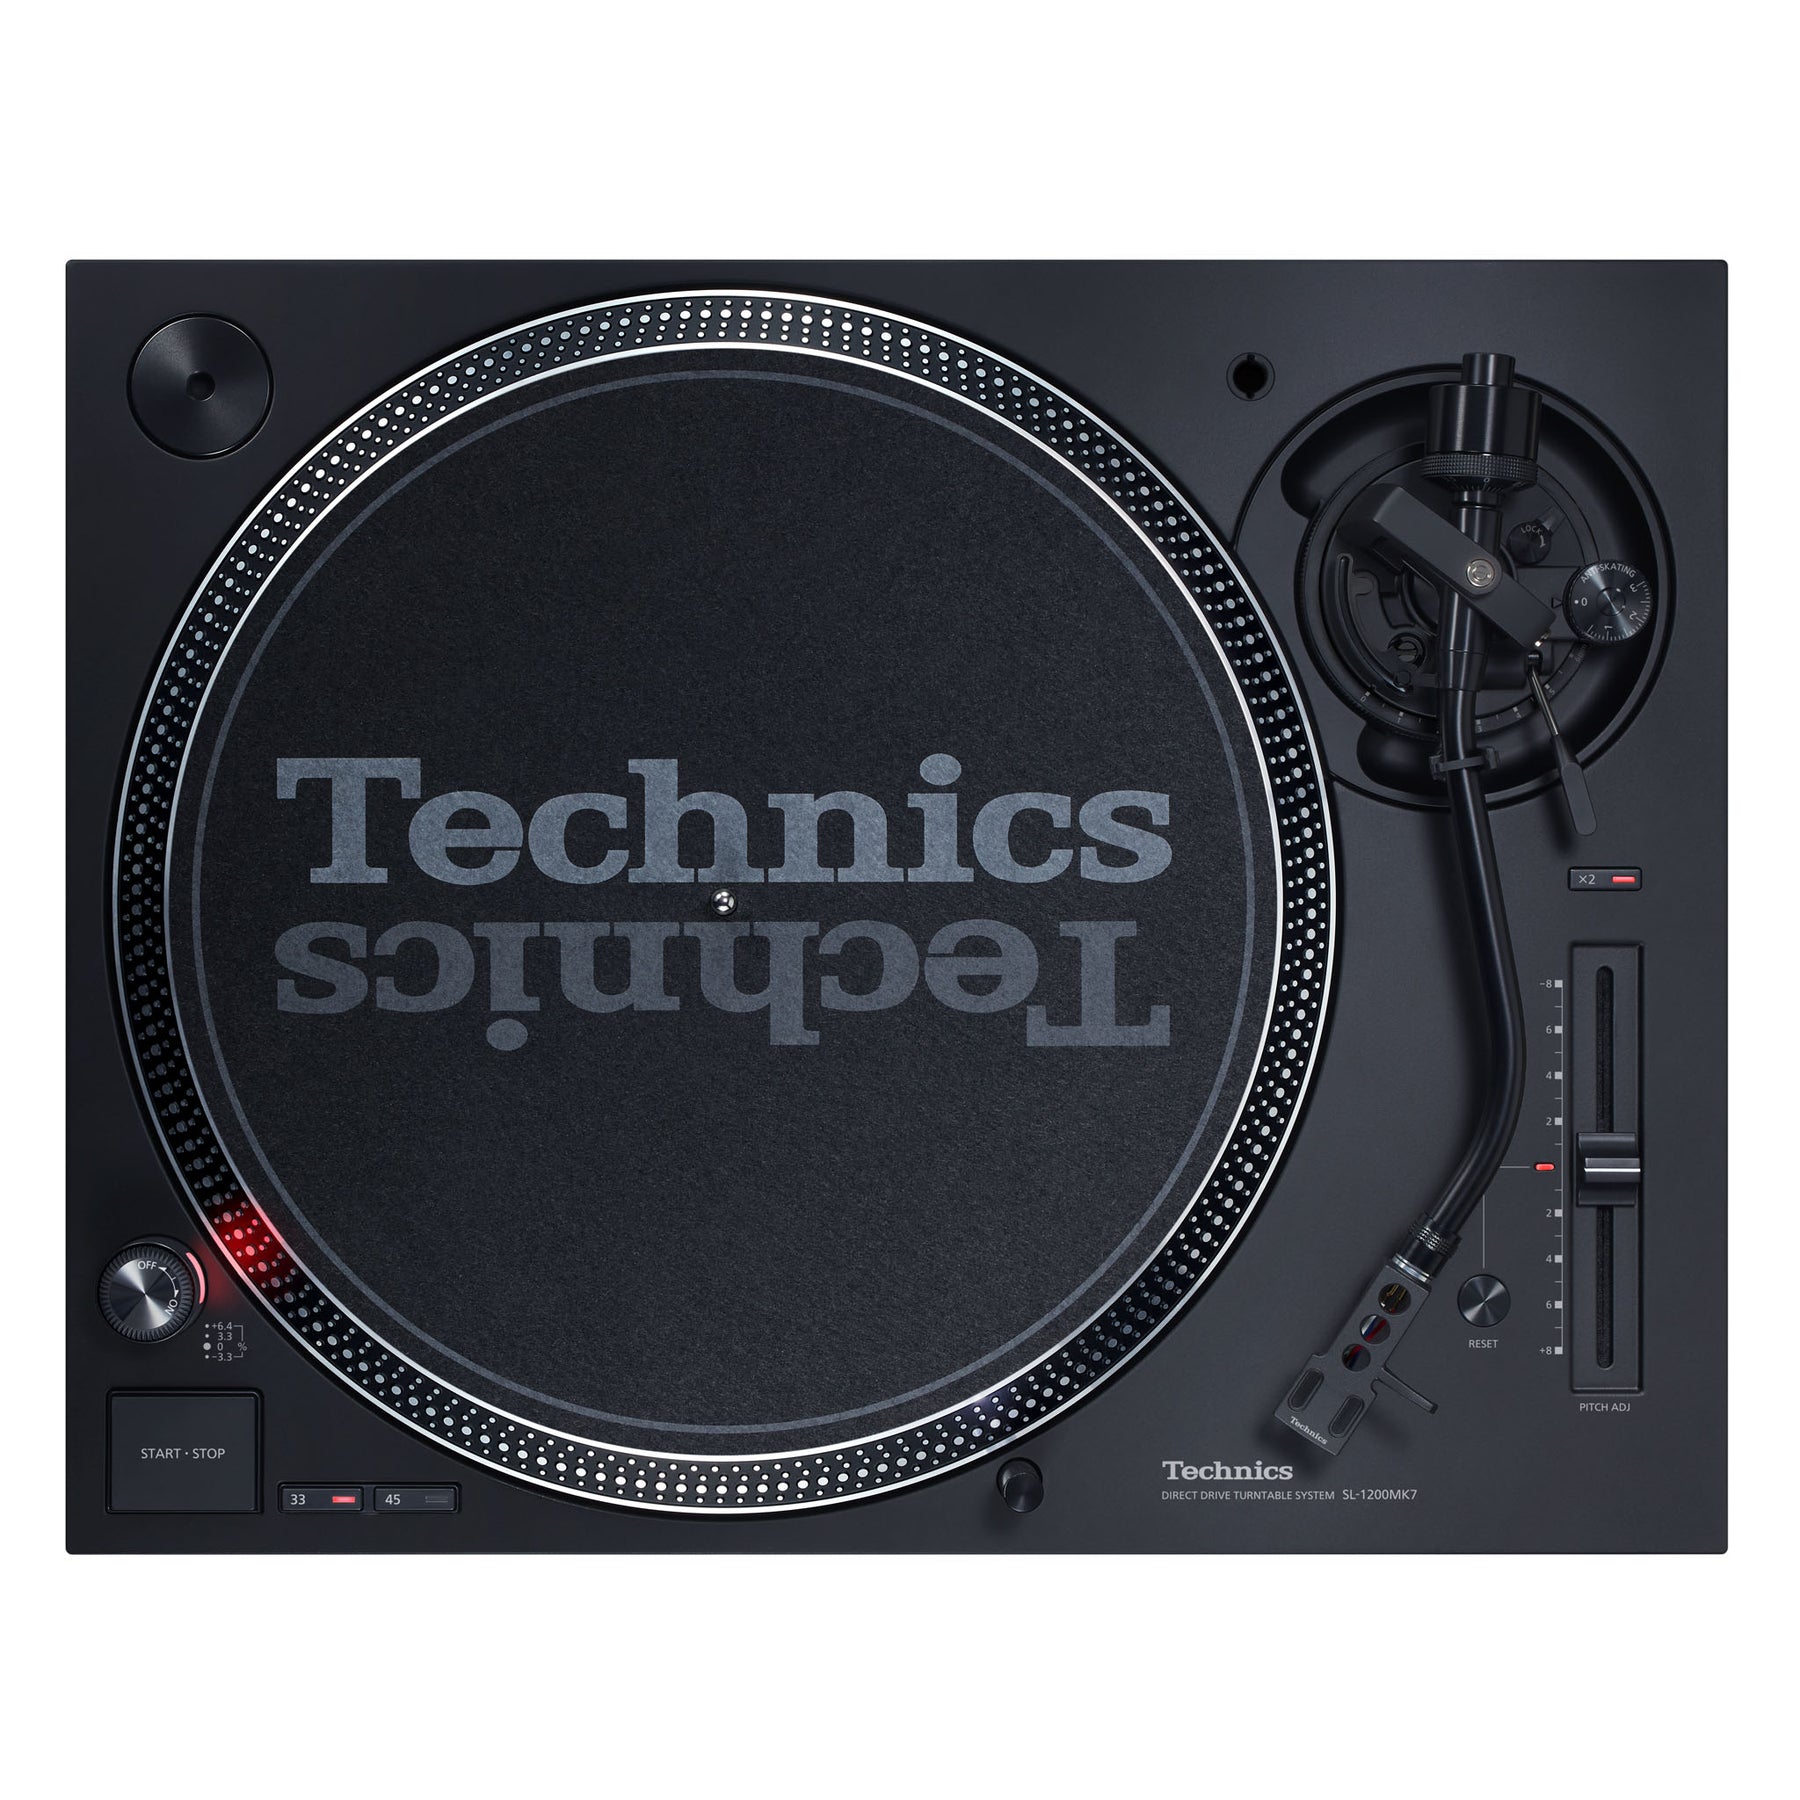 Direct Drive Turntable System SL-1200MK7